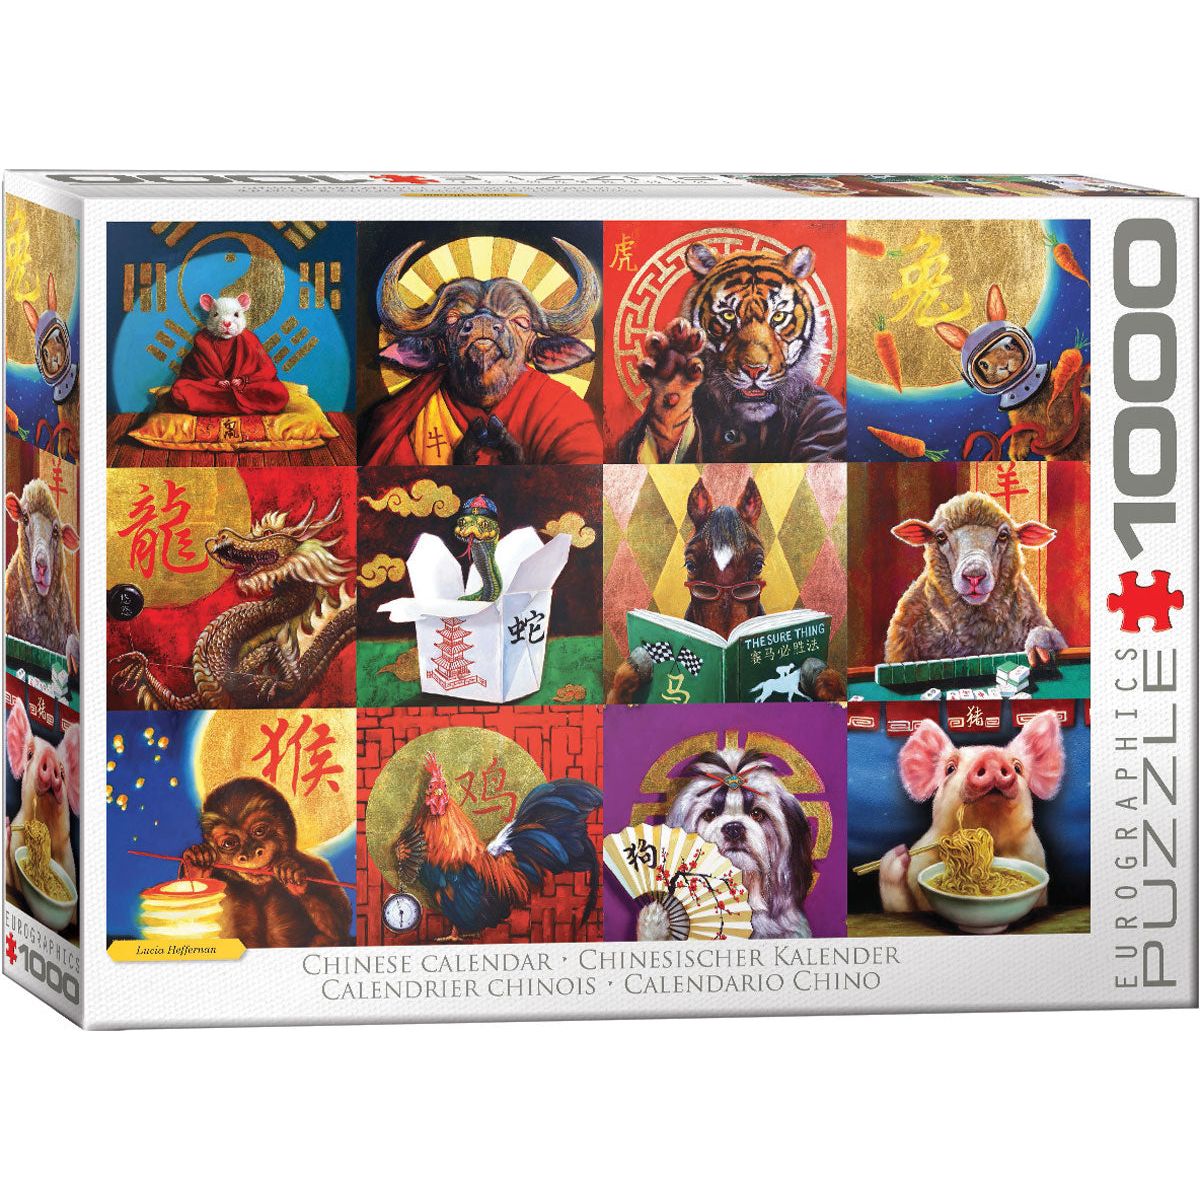 Chinese Calendar by Lucia Heff 1000PC Puzzle Eurographics - Zinnias Gift Boutique